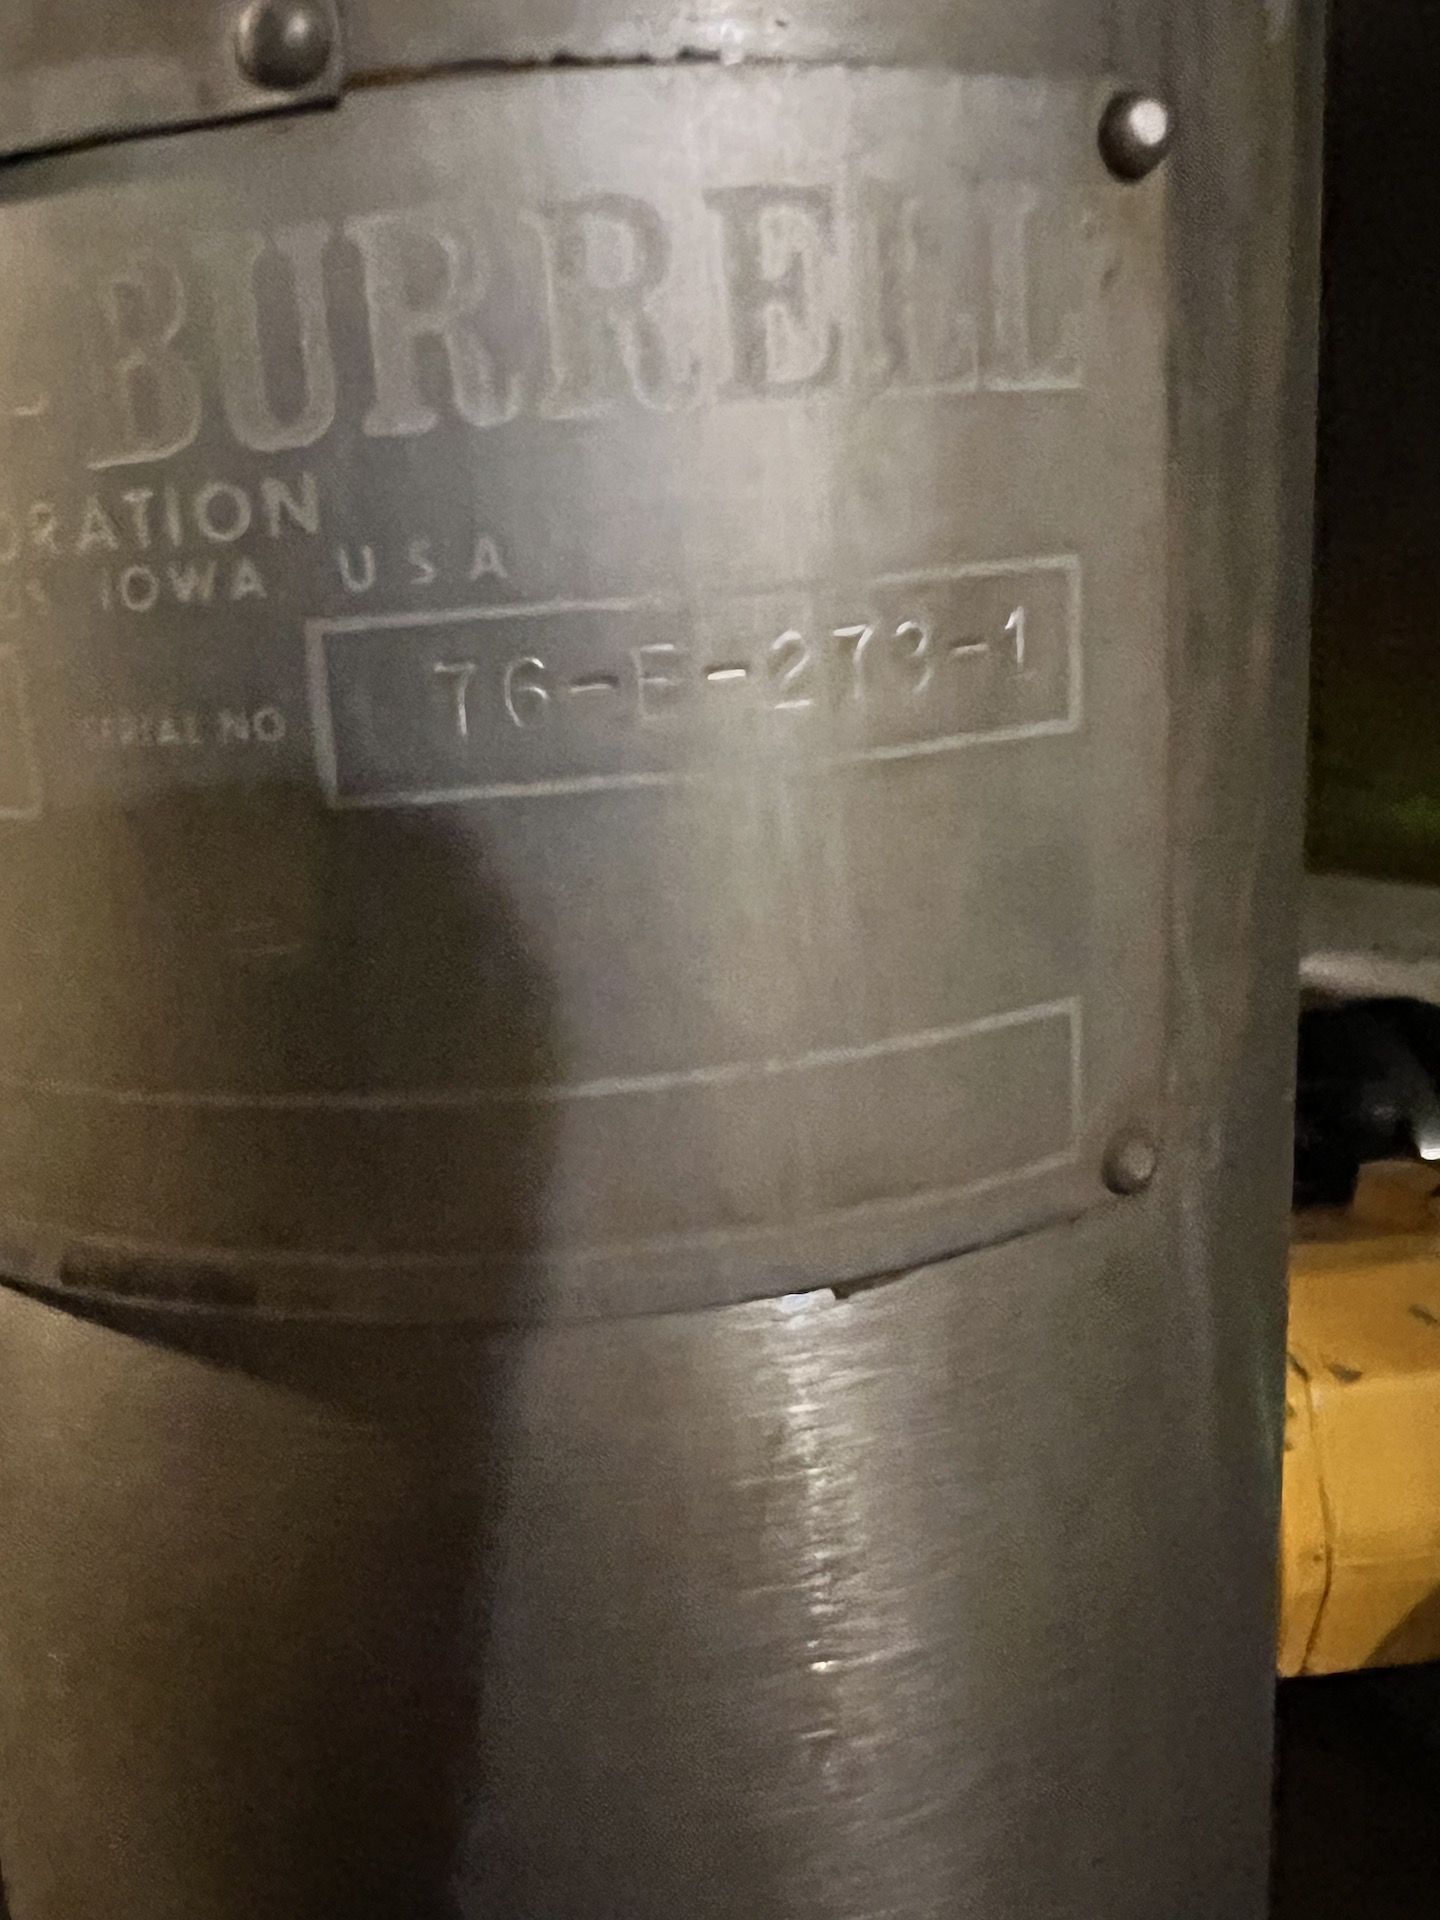 CHERRY BURRELL S/S MIXING TANK WITH TOP-MOUNT AGITATION, S/N 76-E-273-1 (SIMPLE LOADING FEE $1,650) - Image 9 of 13